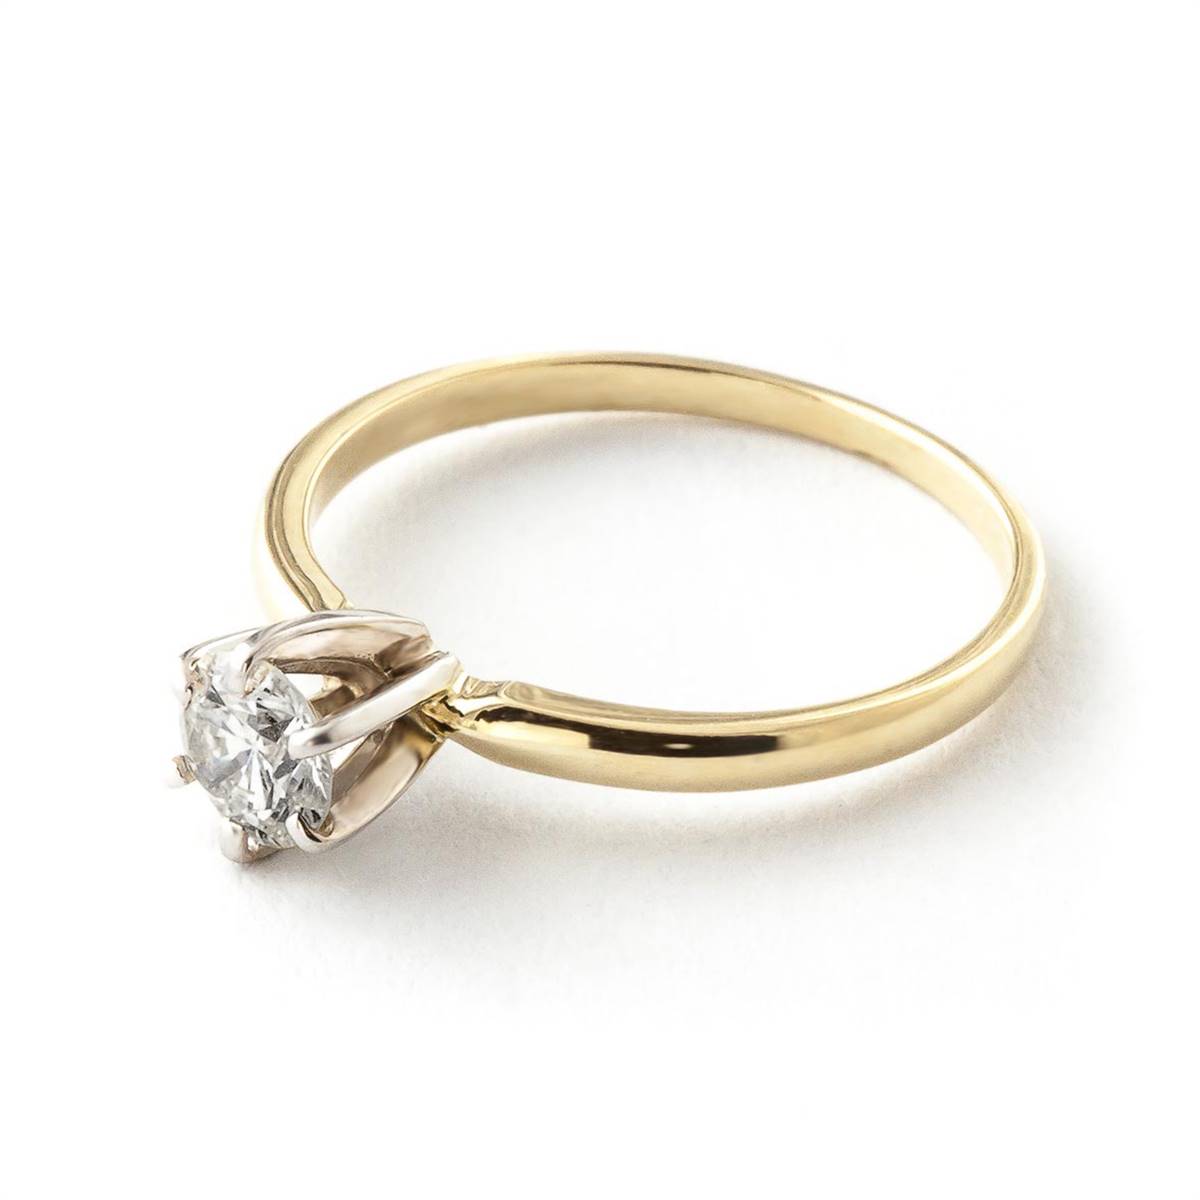 14K Solid Yellow Gold Solitaire Ring w/ 0.40 Carat H-i, Si-2 Natural Diamond